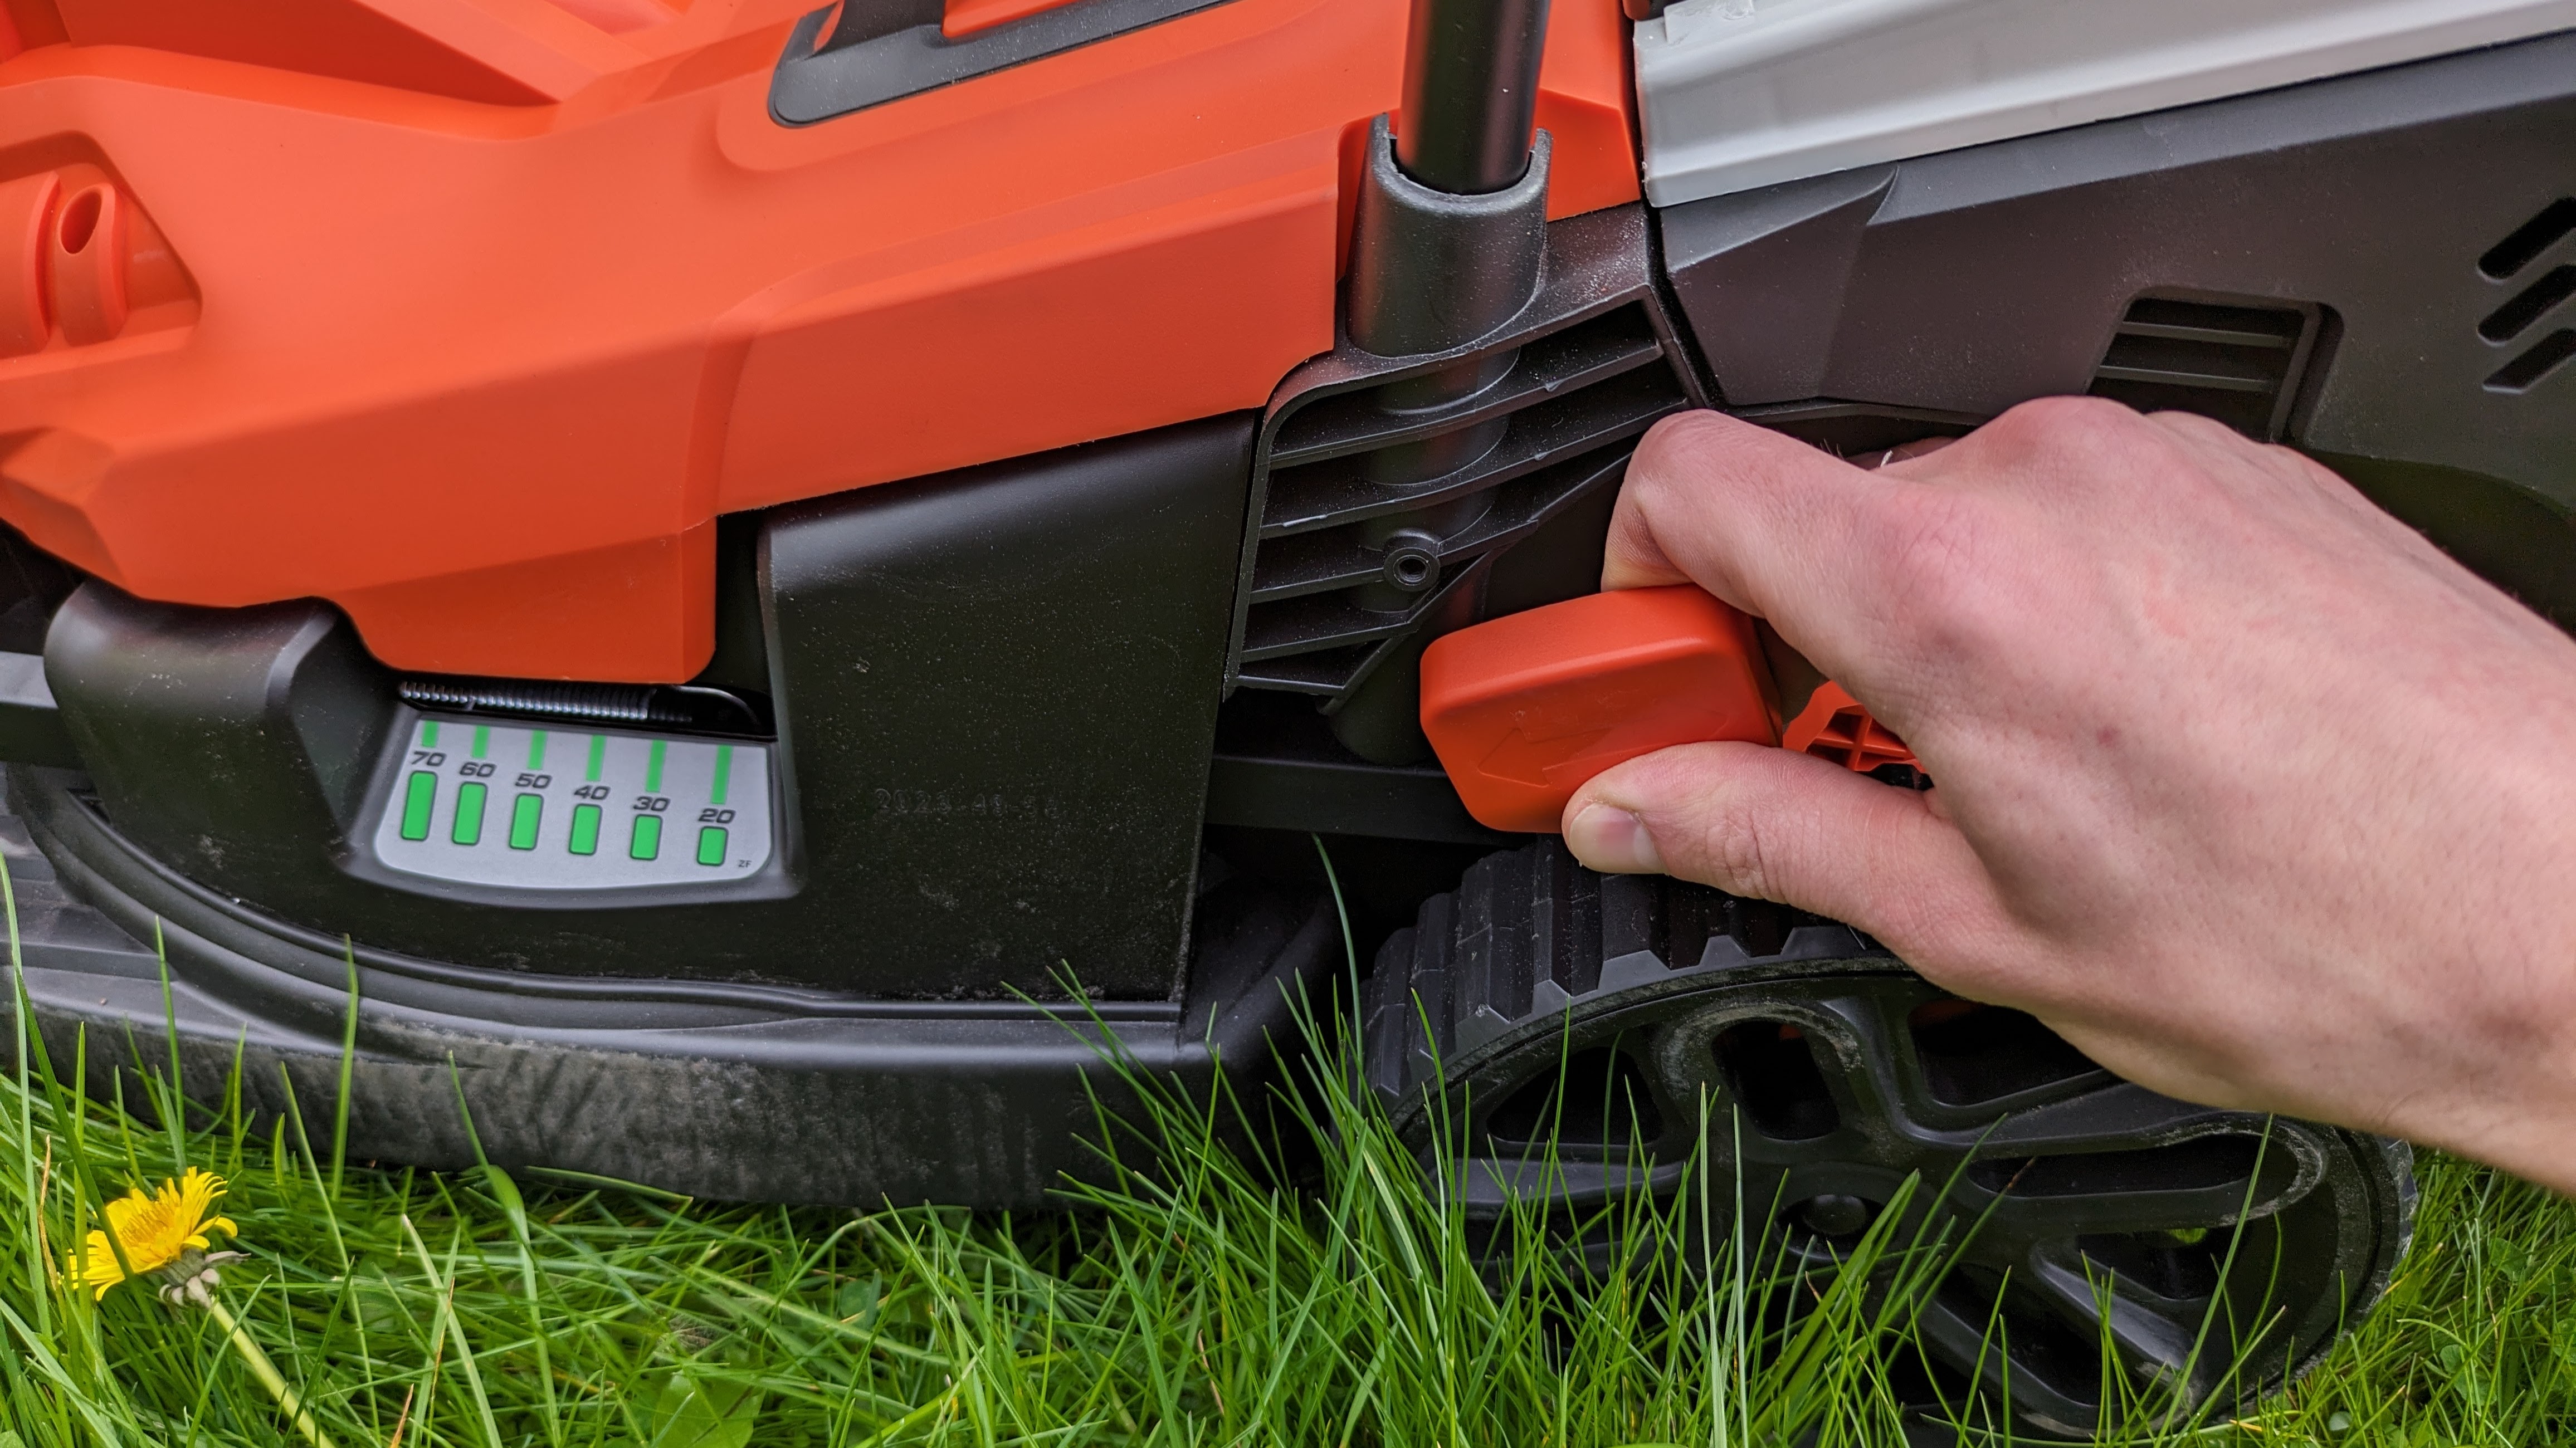 Adjusting the cutting height on Black + Decker's lawn mower.